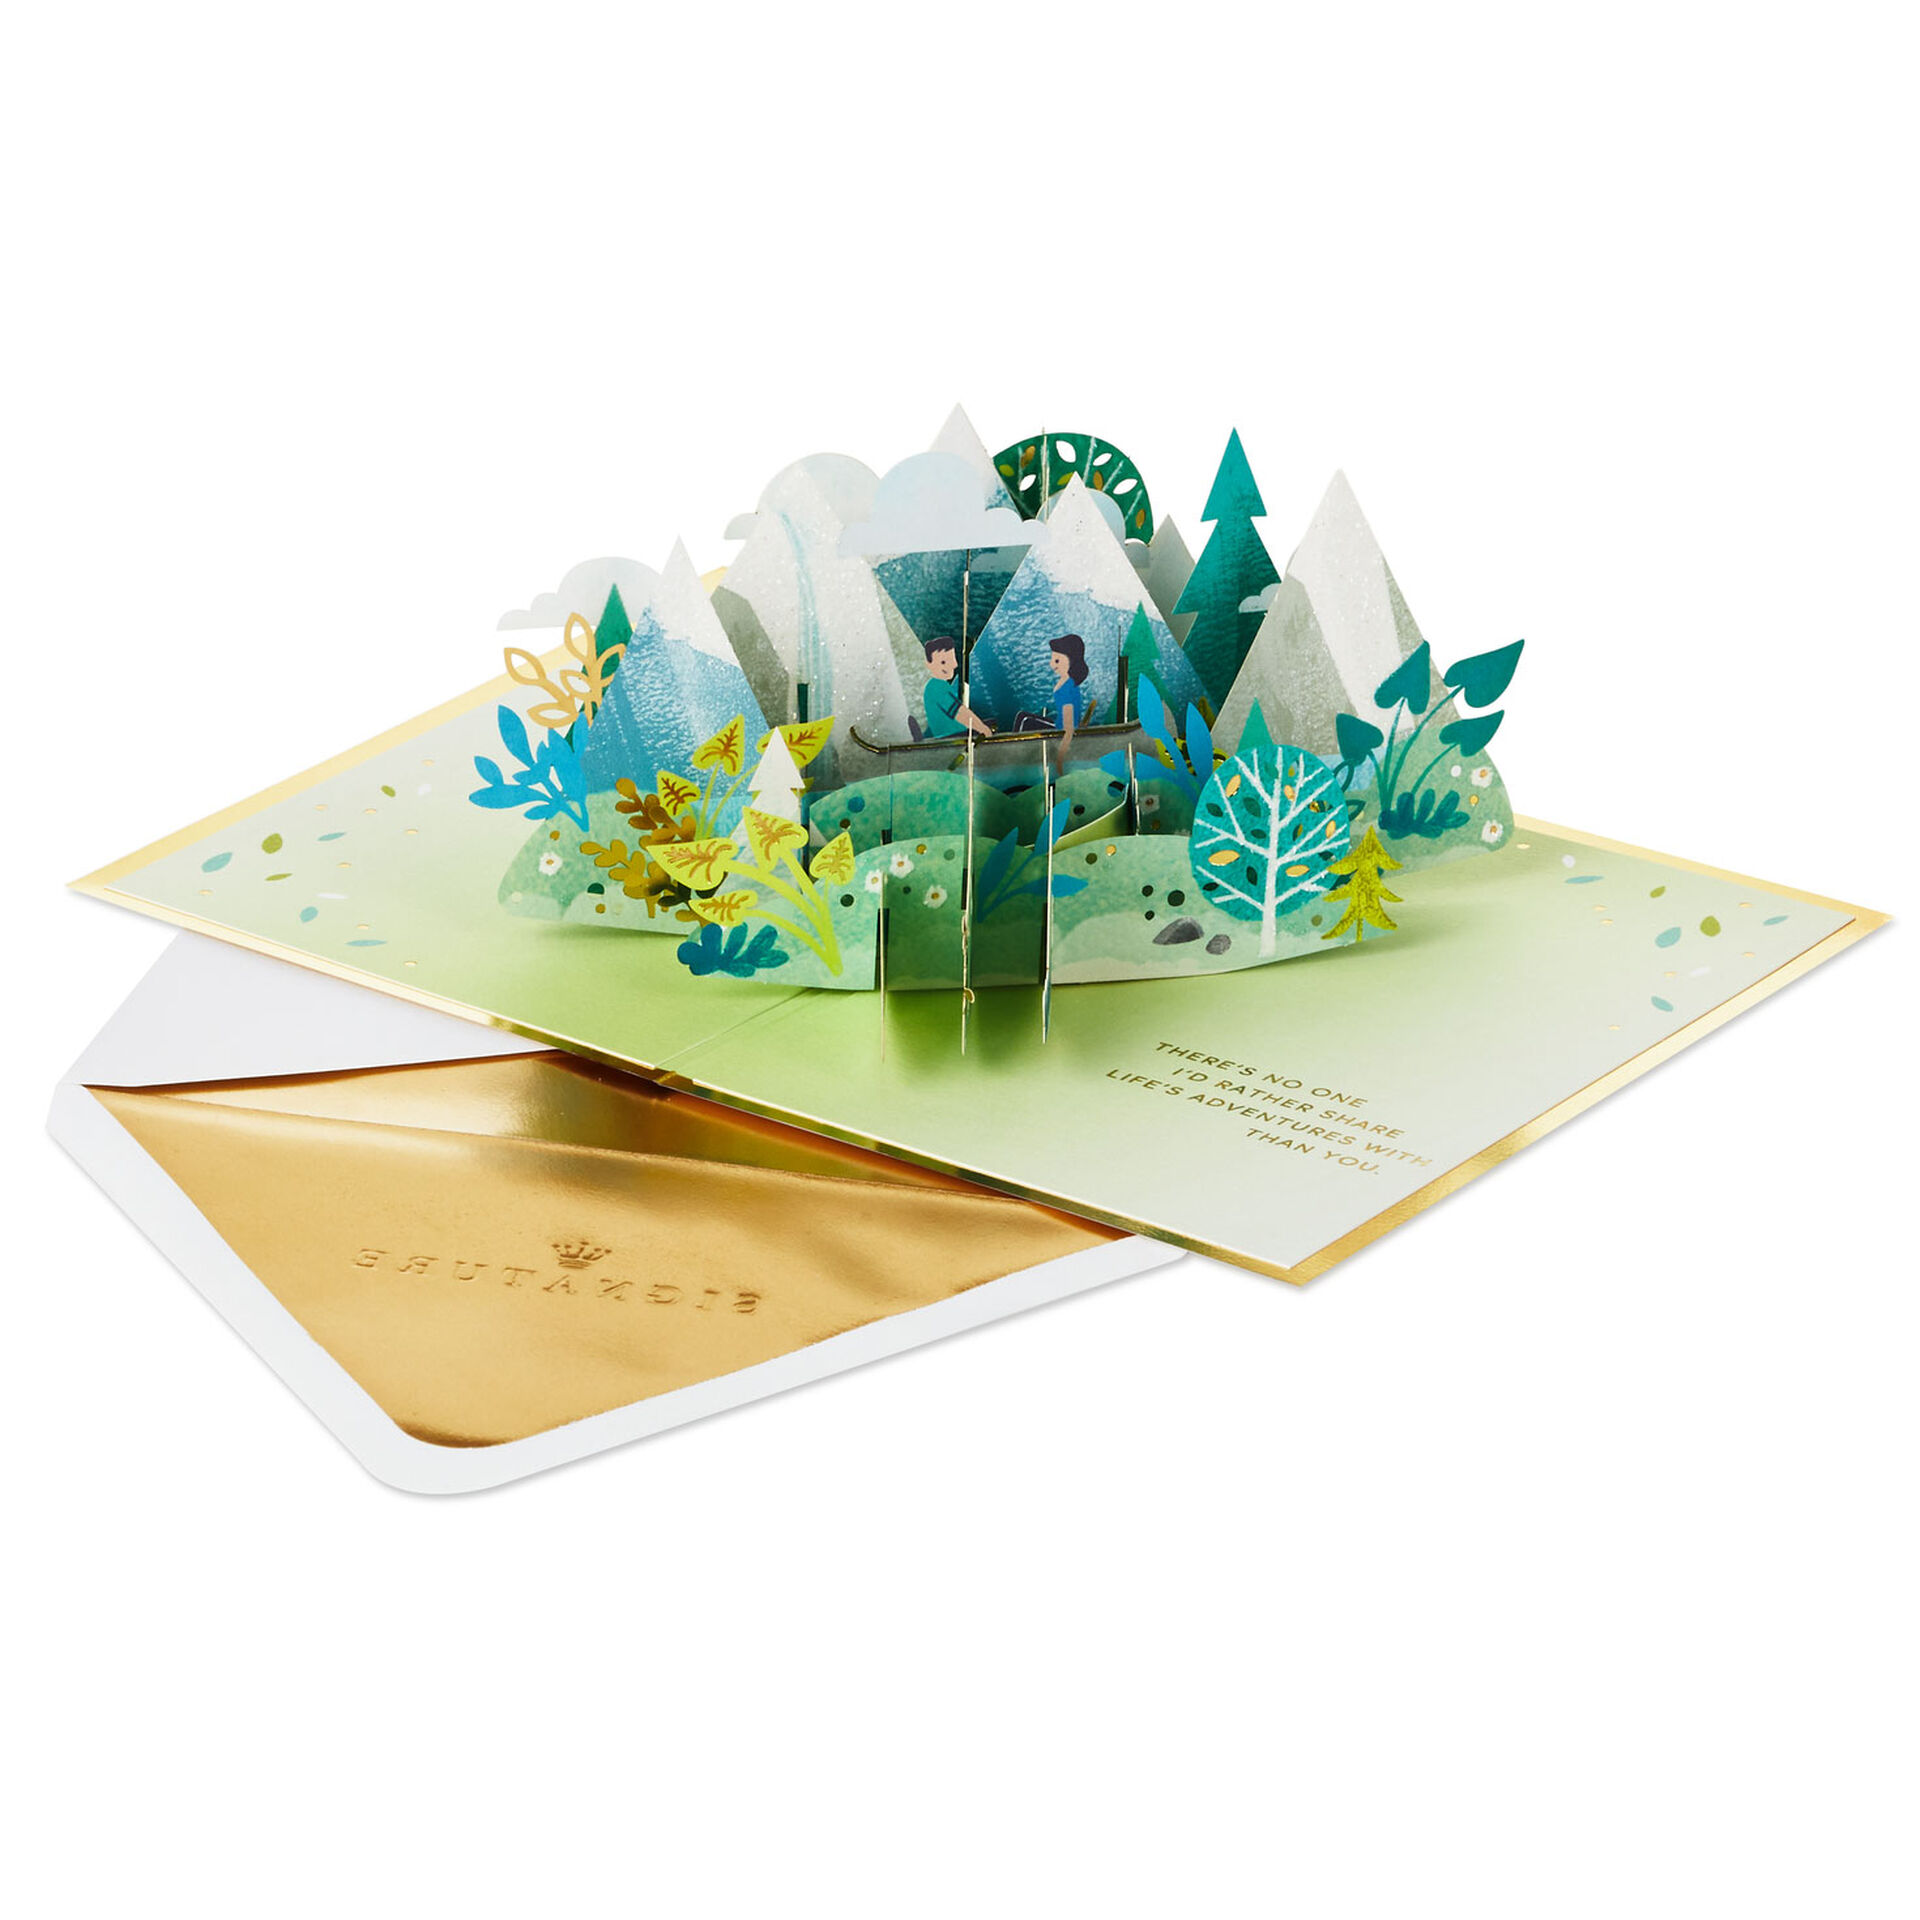 Mountains-and-Trees-3D-PopUp-Love-Card_1299LAD2890_02